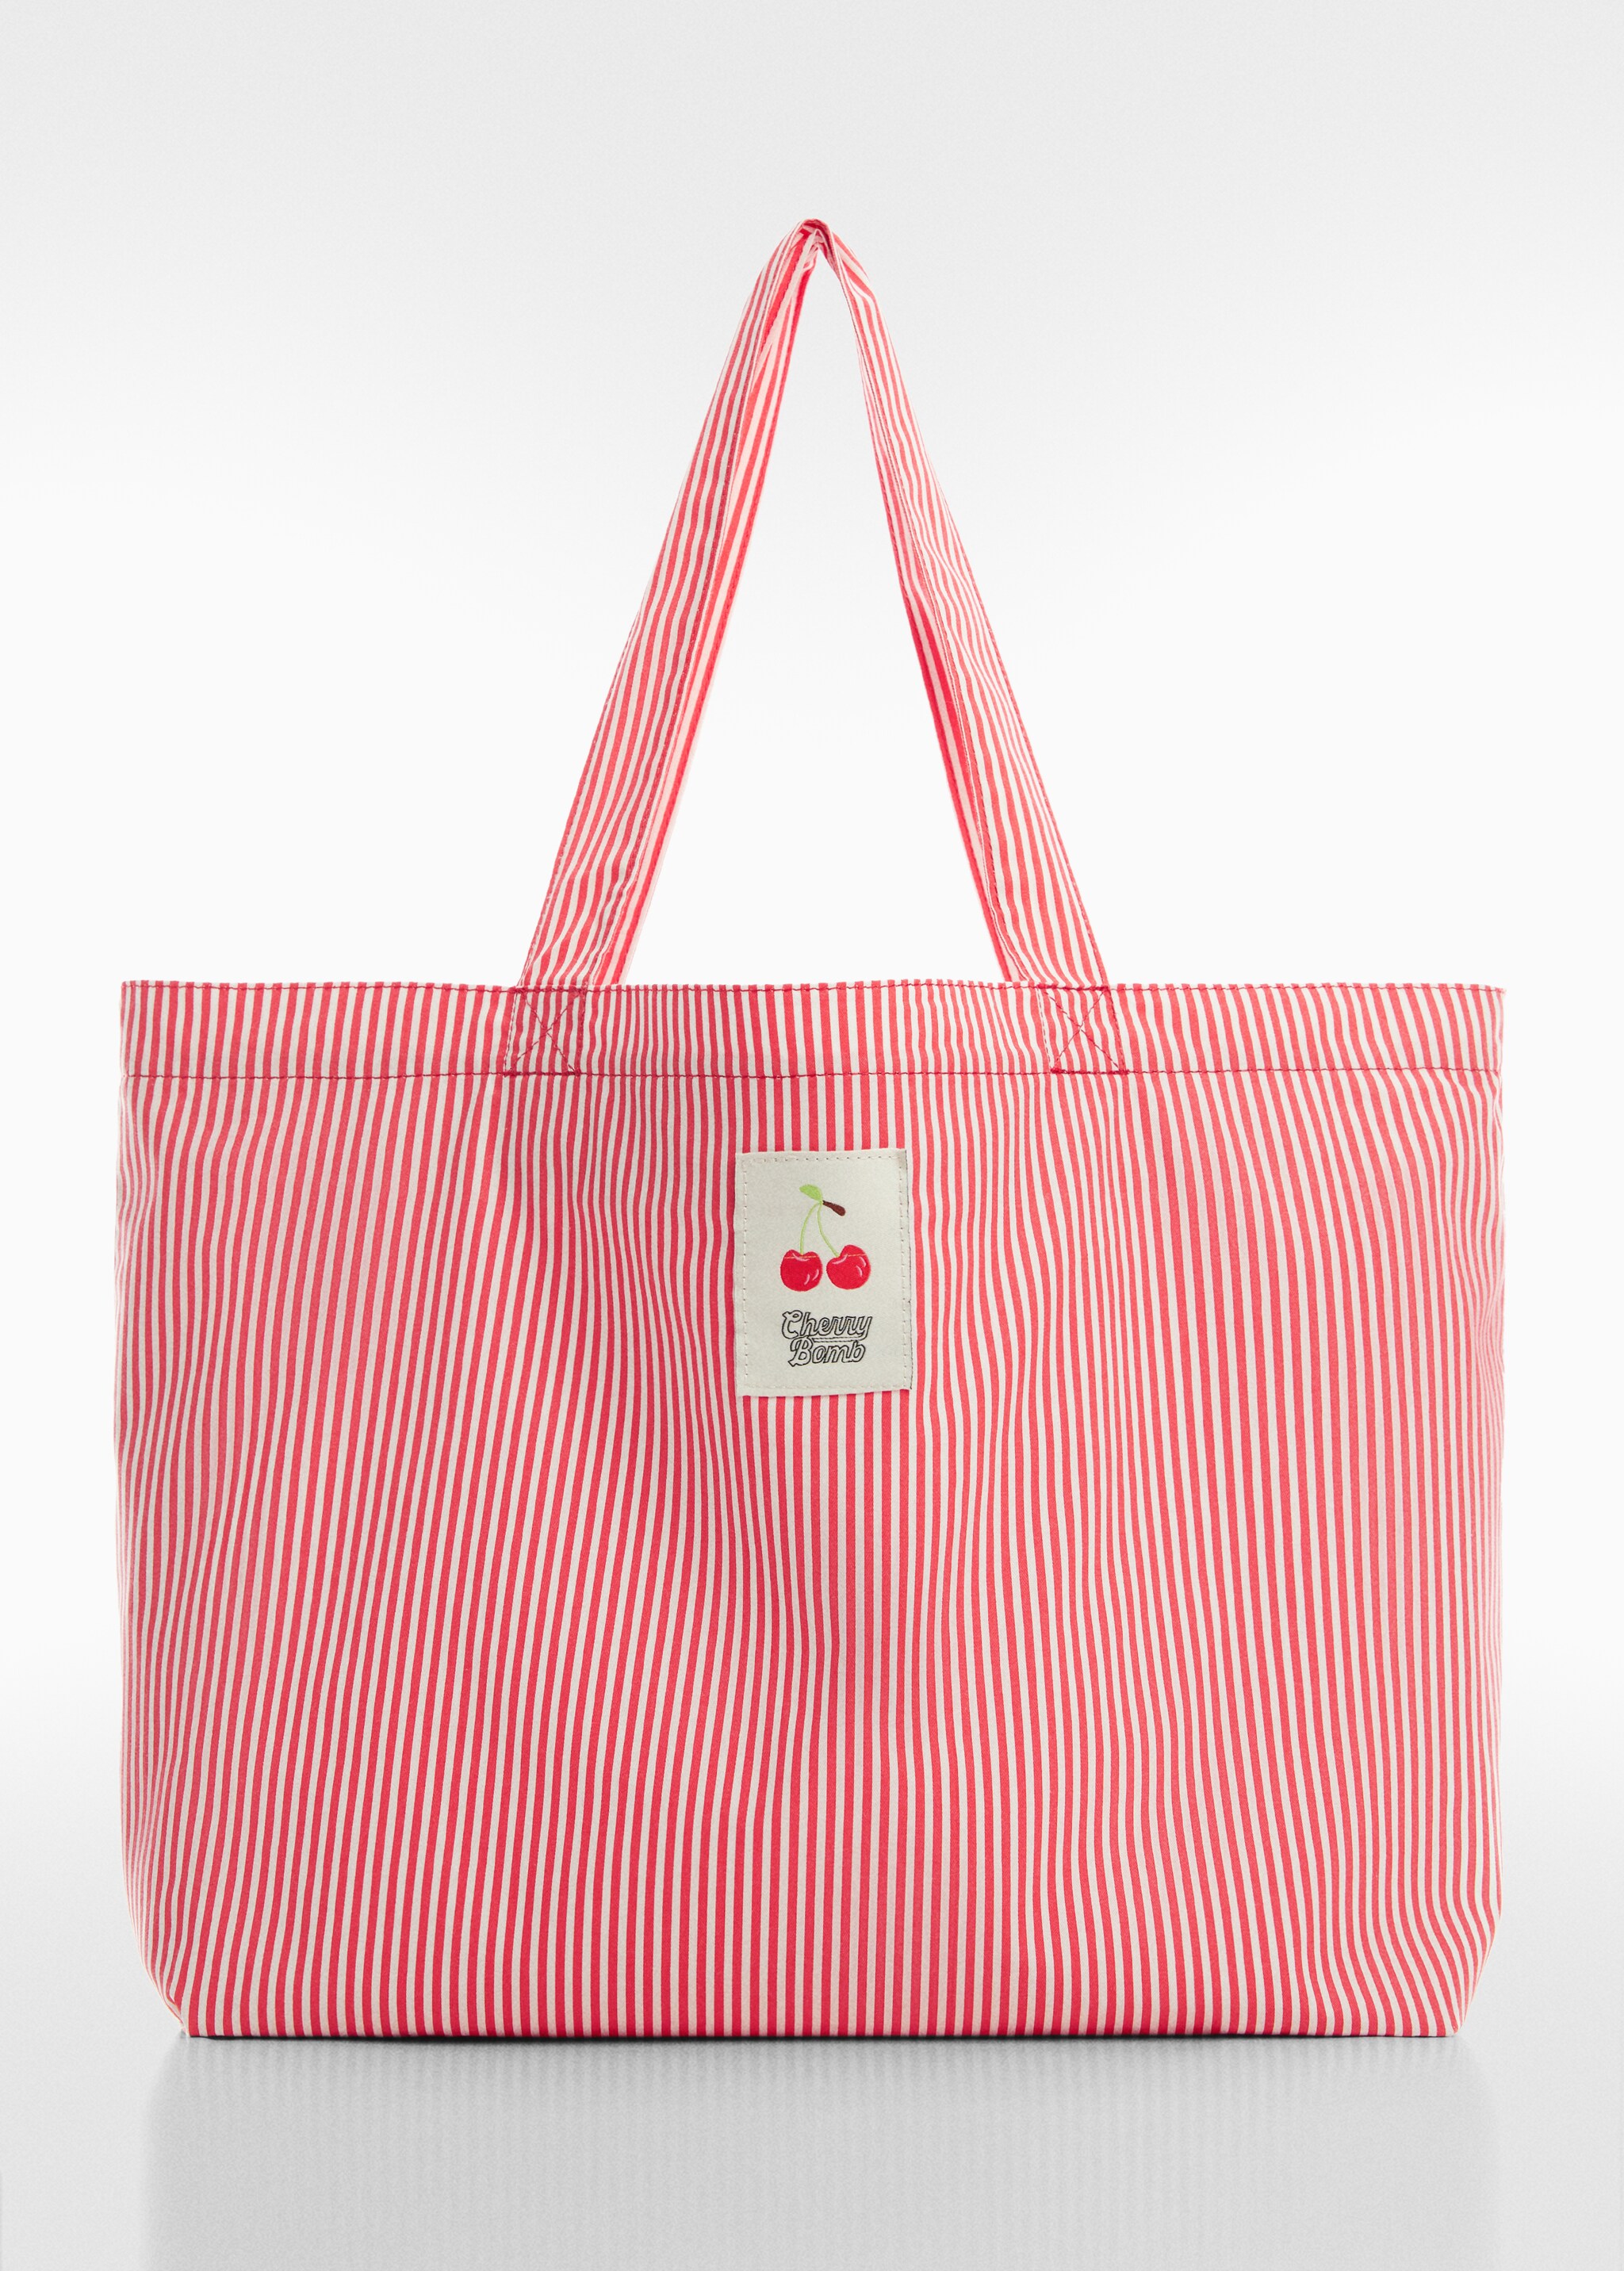 Striped shopper bag - Article without model